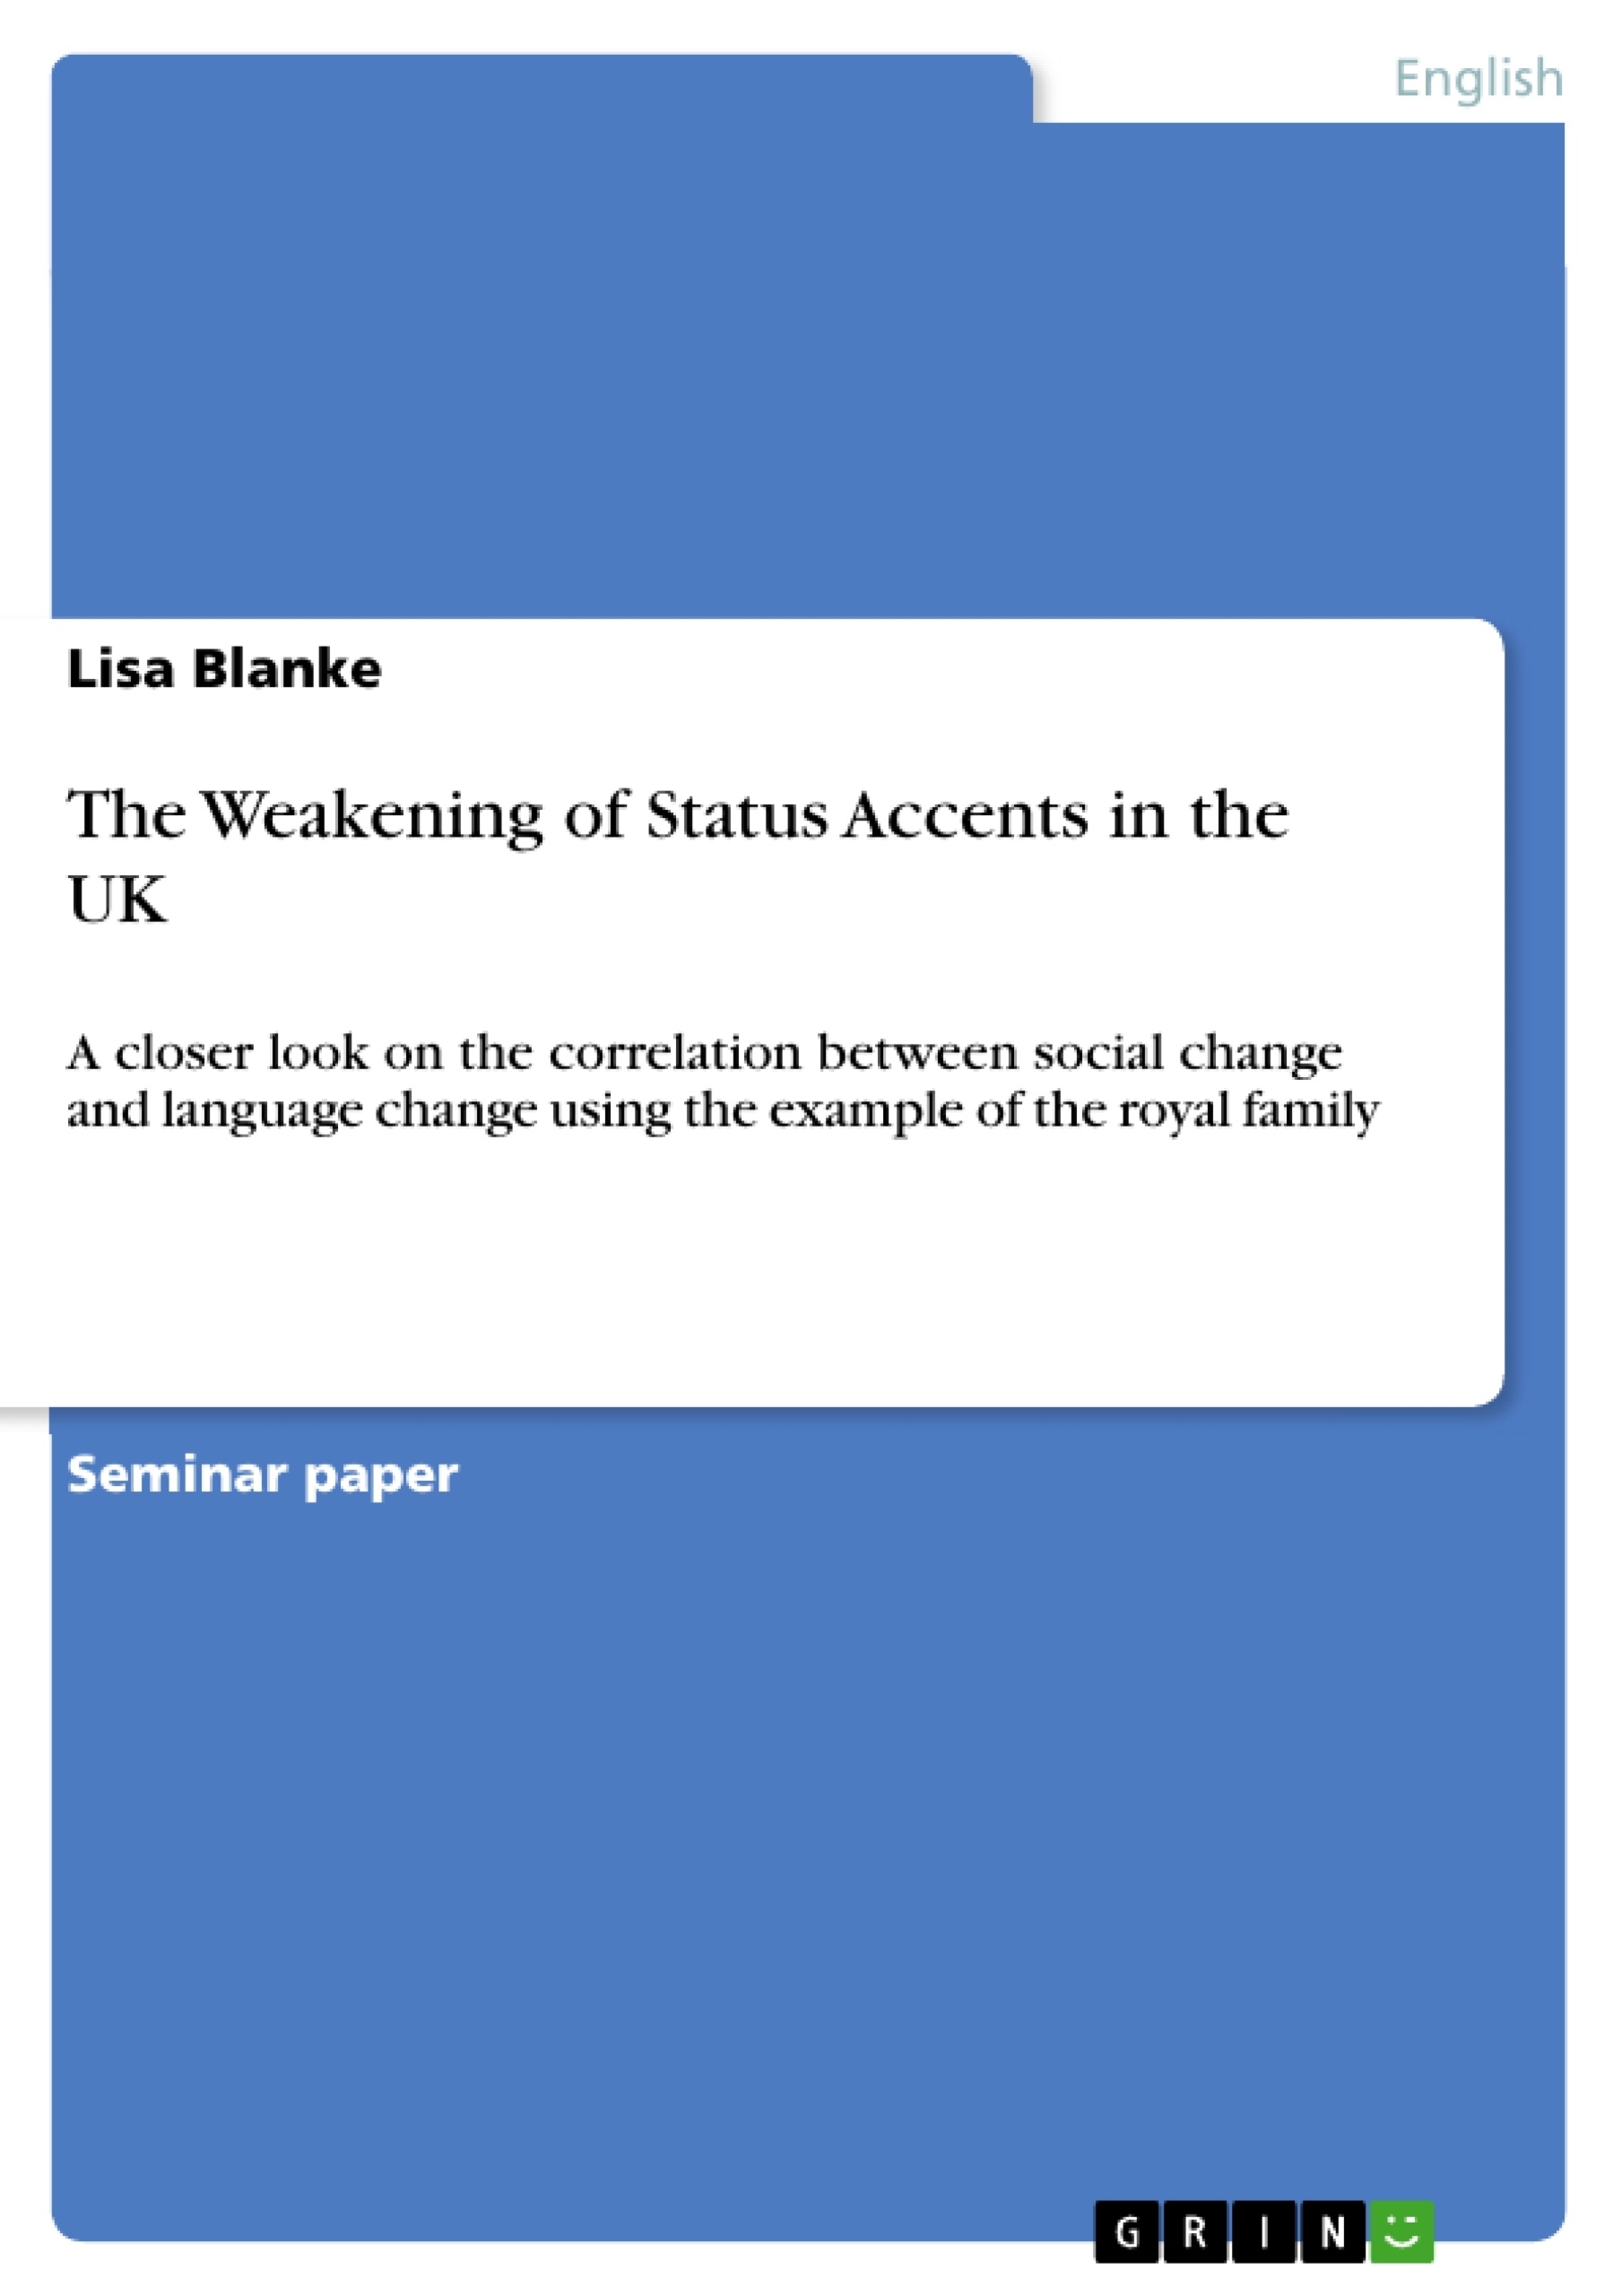 Title: The Weakening of Status Accents in the UK